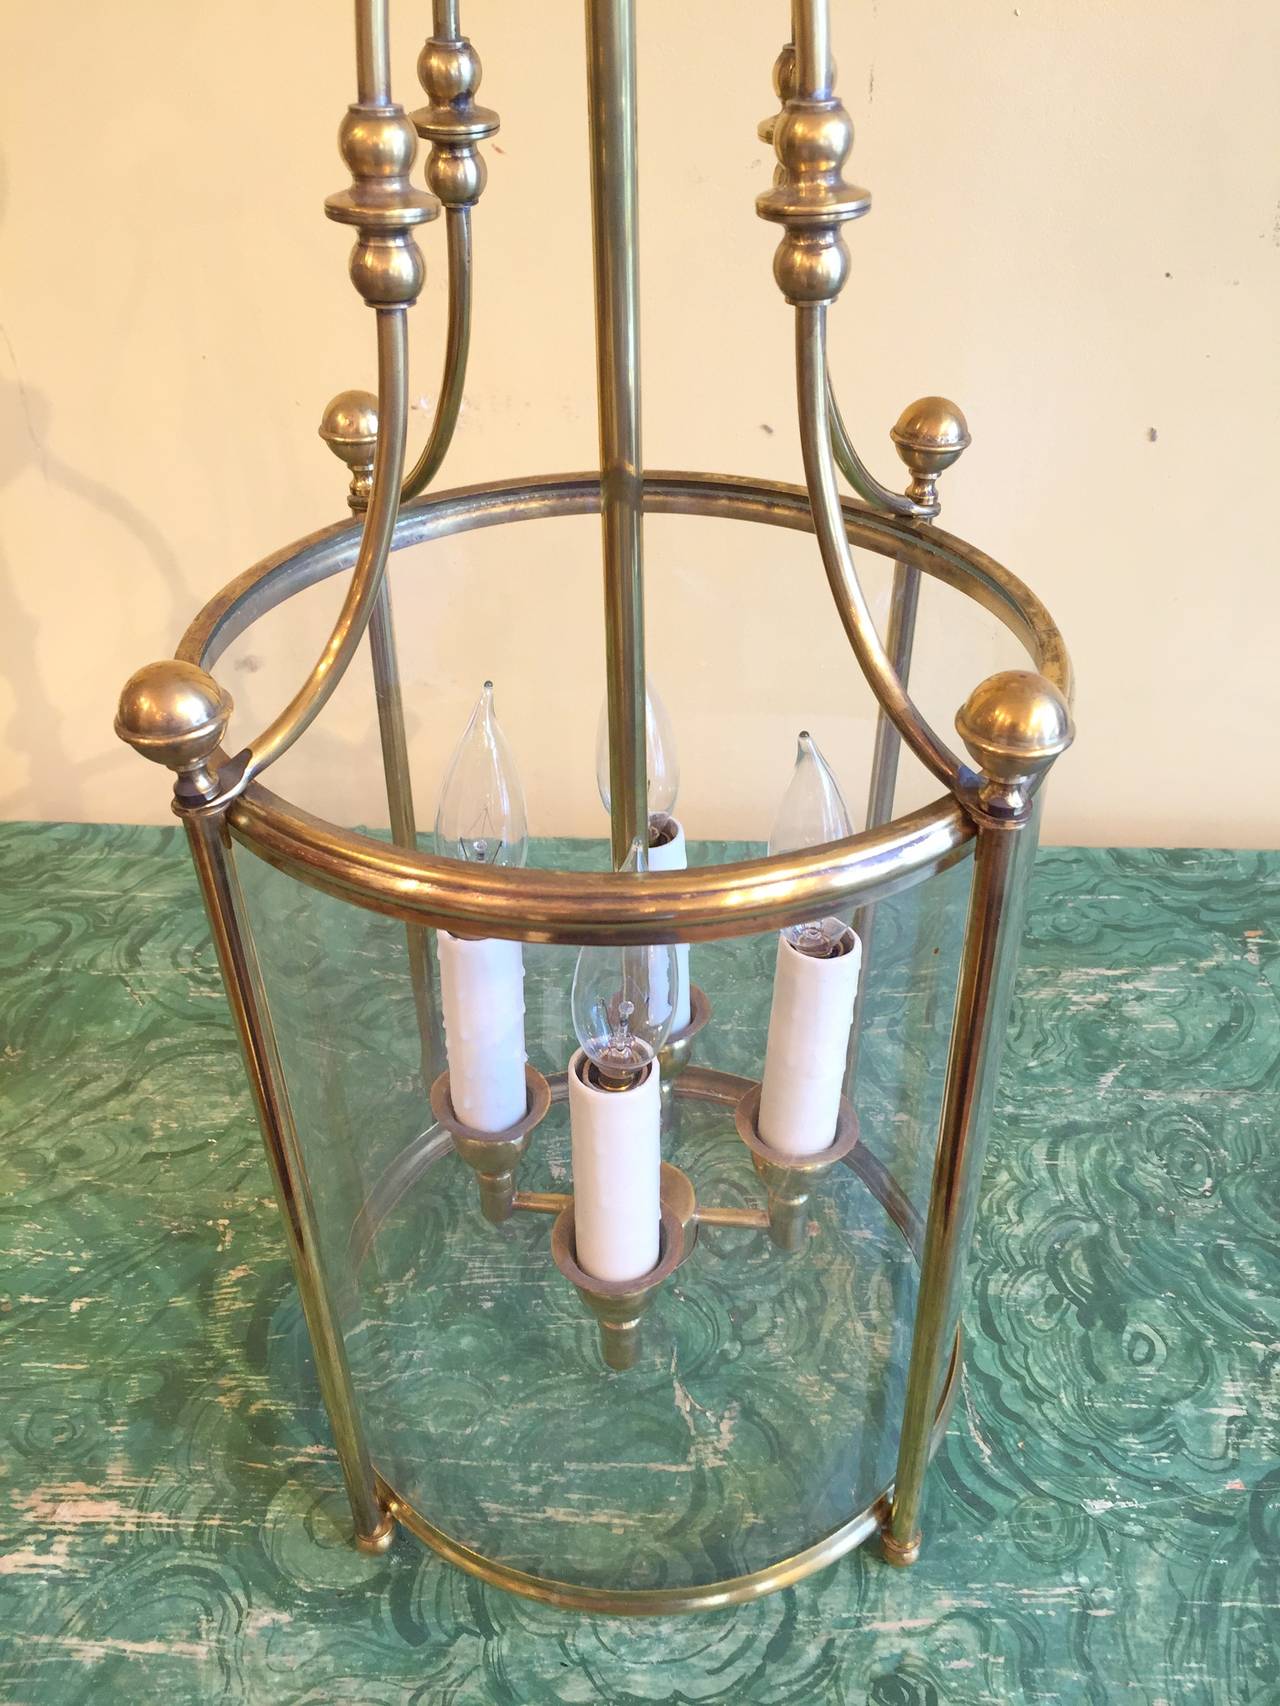 Very nice wired for U.S. brass vintage French 4 light circular pendant fixture.